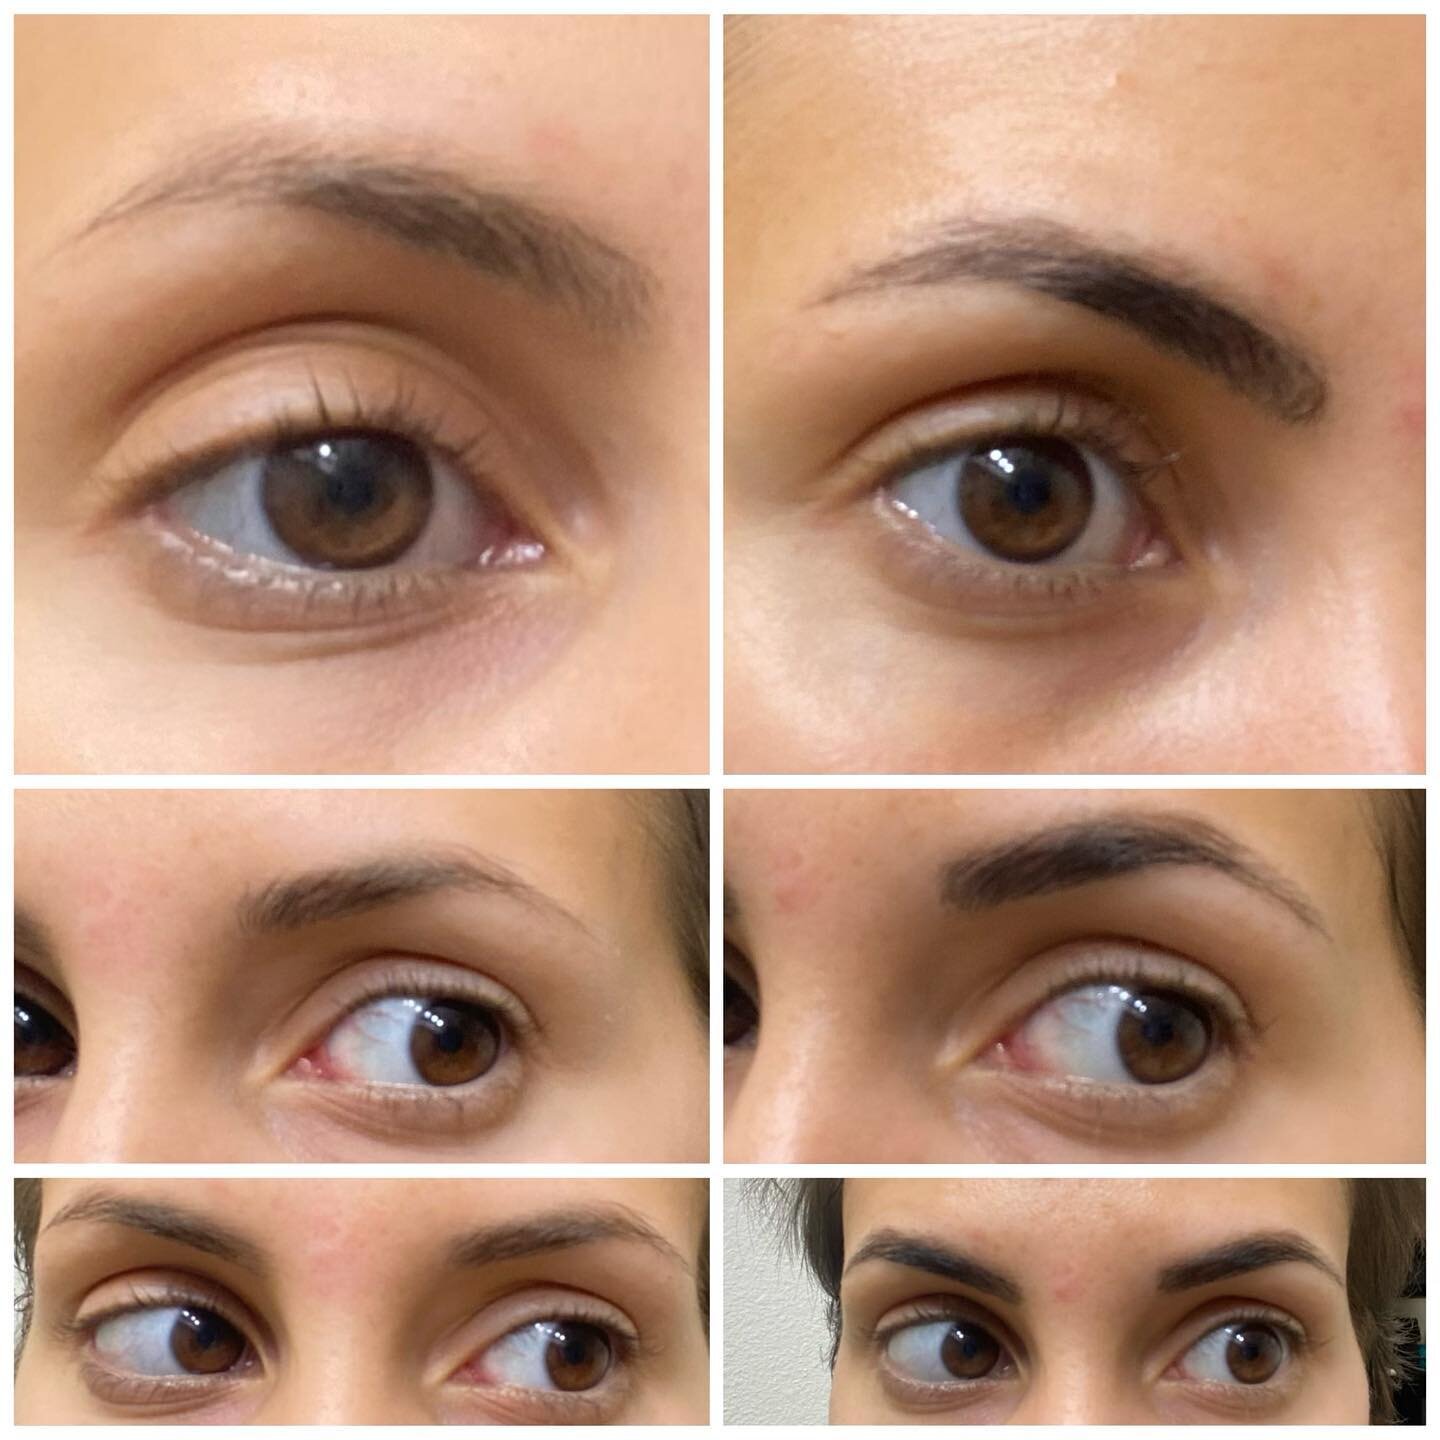 Starting in June, we will be offering brow tint and lamination. 

 Brow lamination semi-permanently sets the eyebrow hairs in a vertical direction, making them appear brushed up. The result gives a fuller, more uniform and defined look.

In addition 